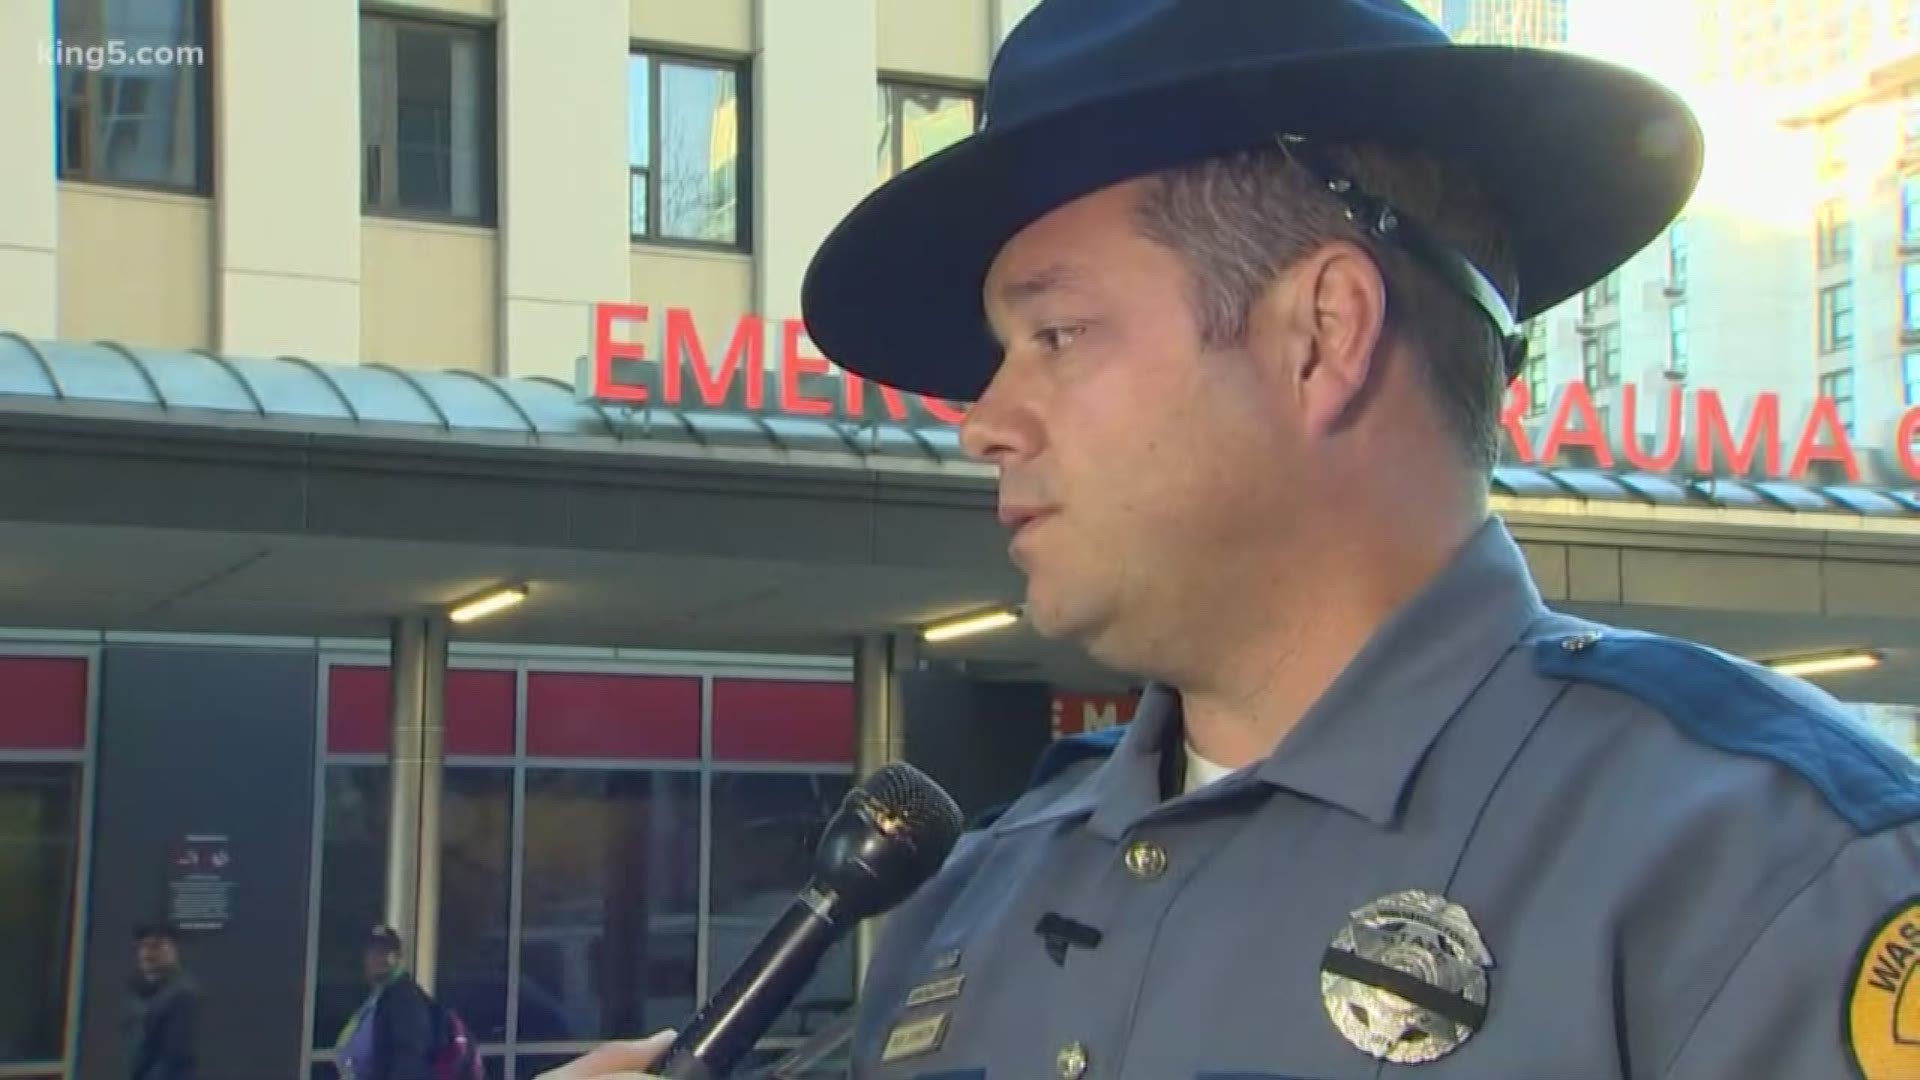 WSP trooper Rick Johnson discusses the impact on the law enforcement community following officer-involved shootings.